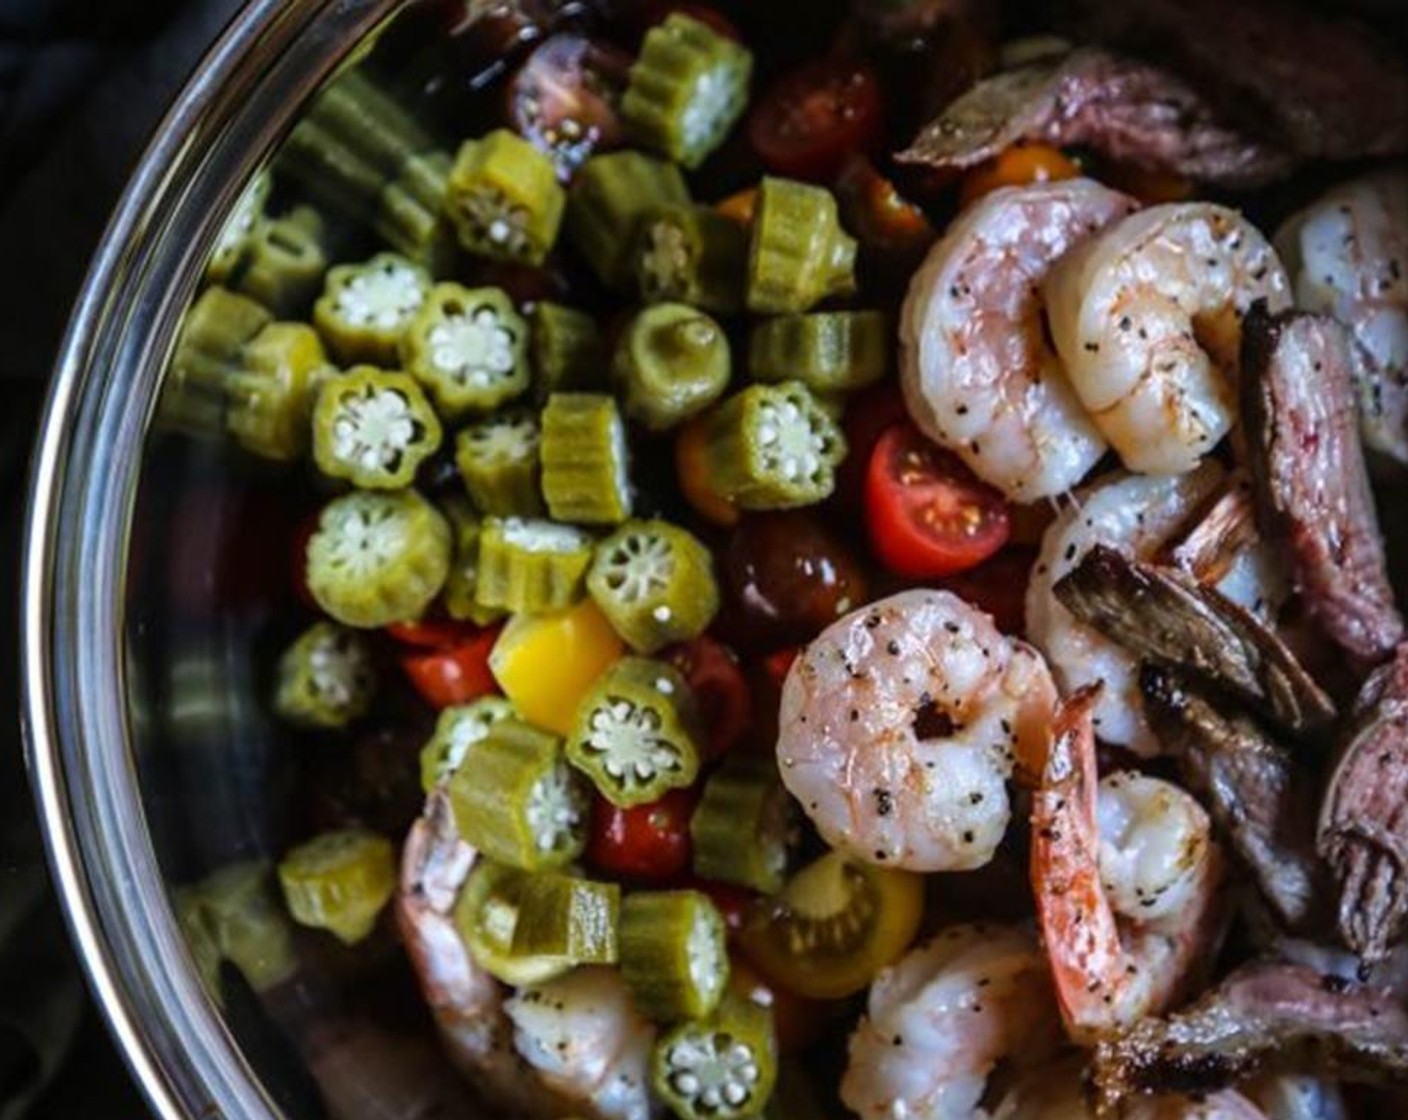 step 7 To make the salad, add croutons, Cucumbers (3 cups), Grape Tomatoes (4 cups), shrimp, Flank Steak (1 lb), Okra (1 cup), Red Onion (1 cup), Fresh Chives (to taste), Extra-Virgin Olive Oil (1/4 cup), and Balsamic Vinegar (to taste). Season with salt and pepper.